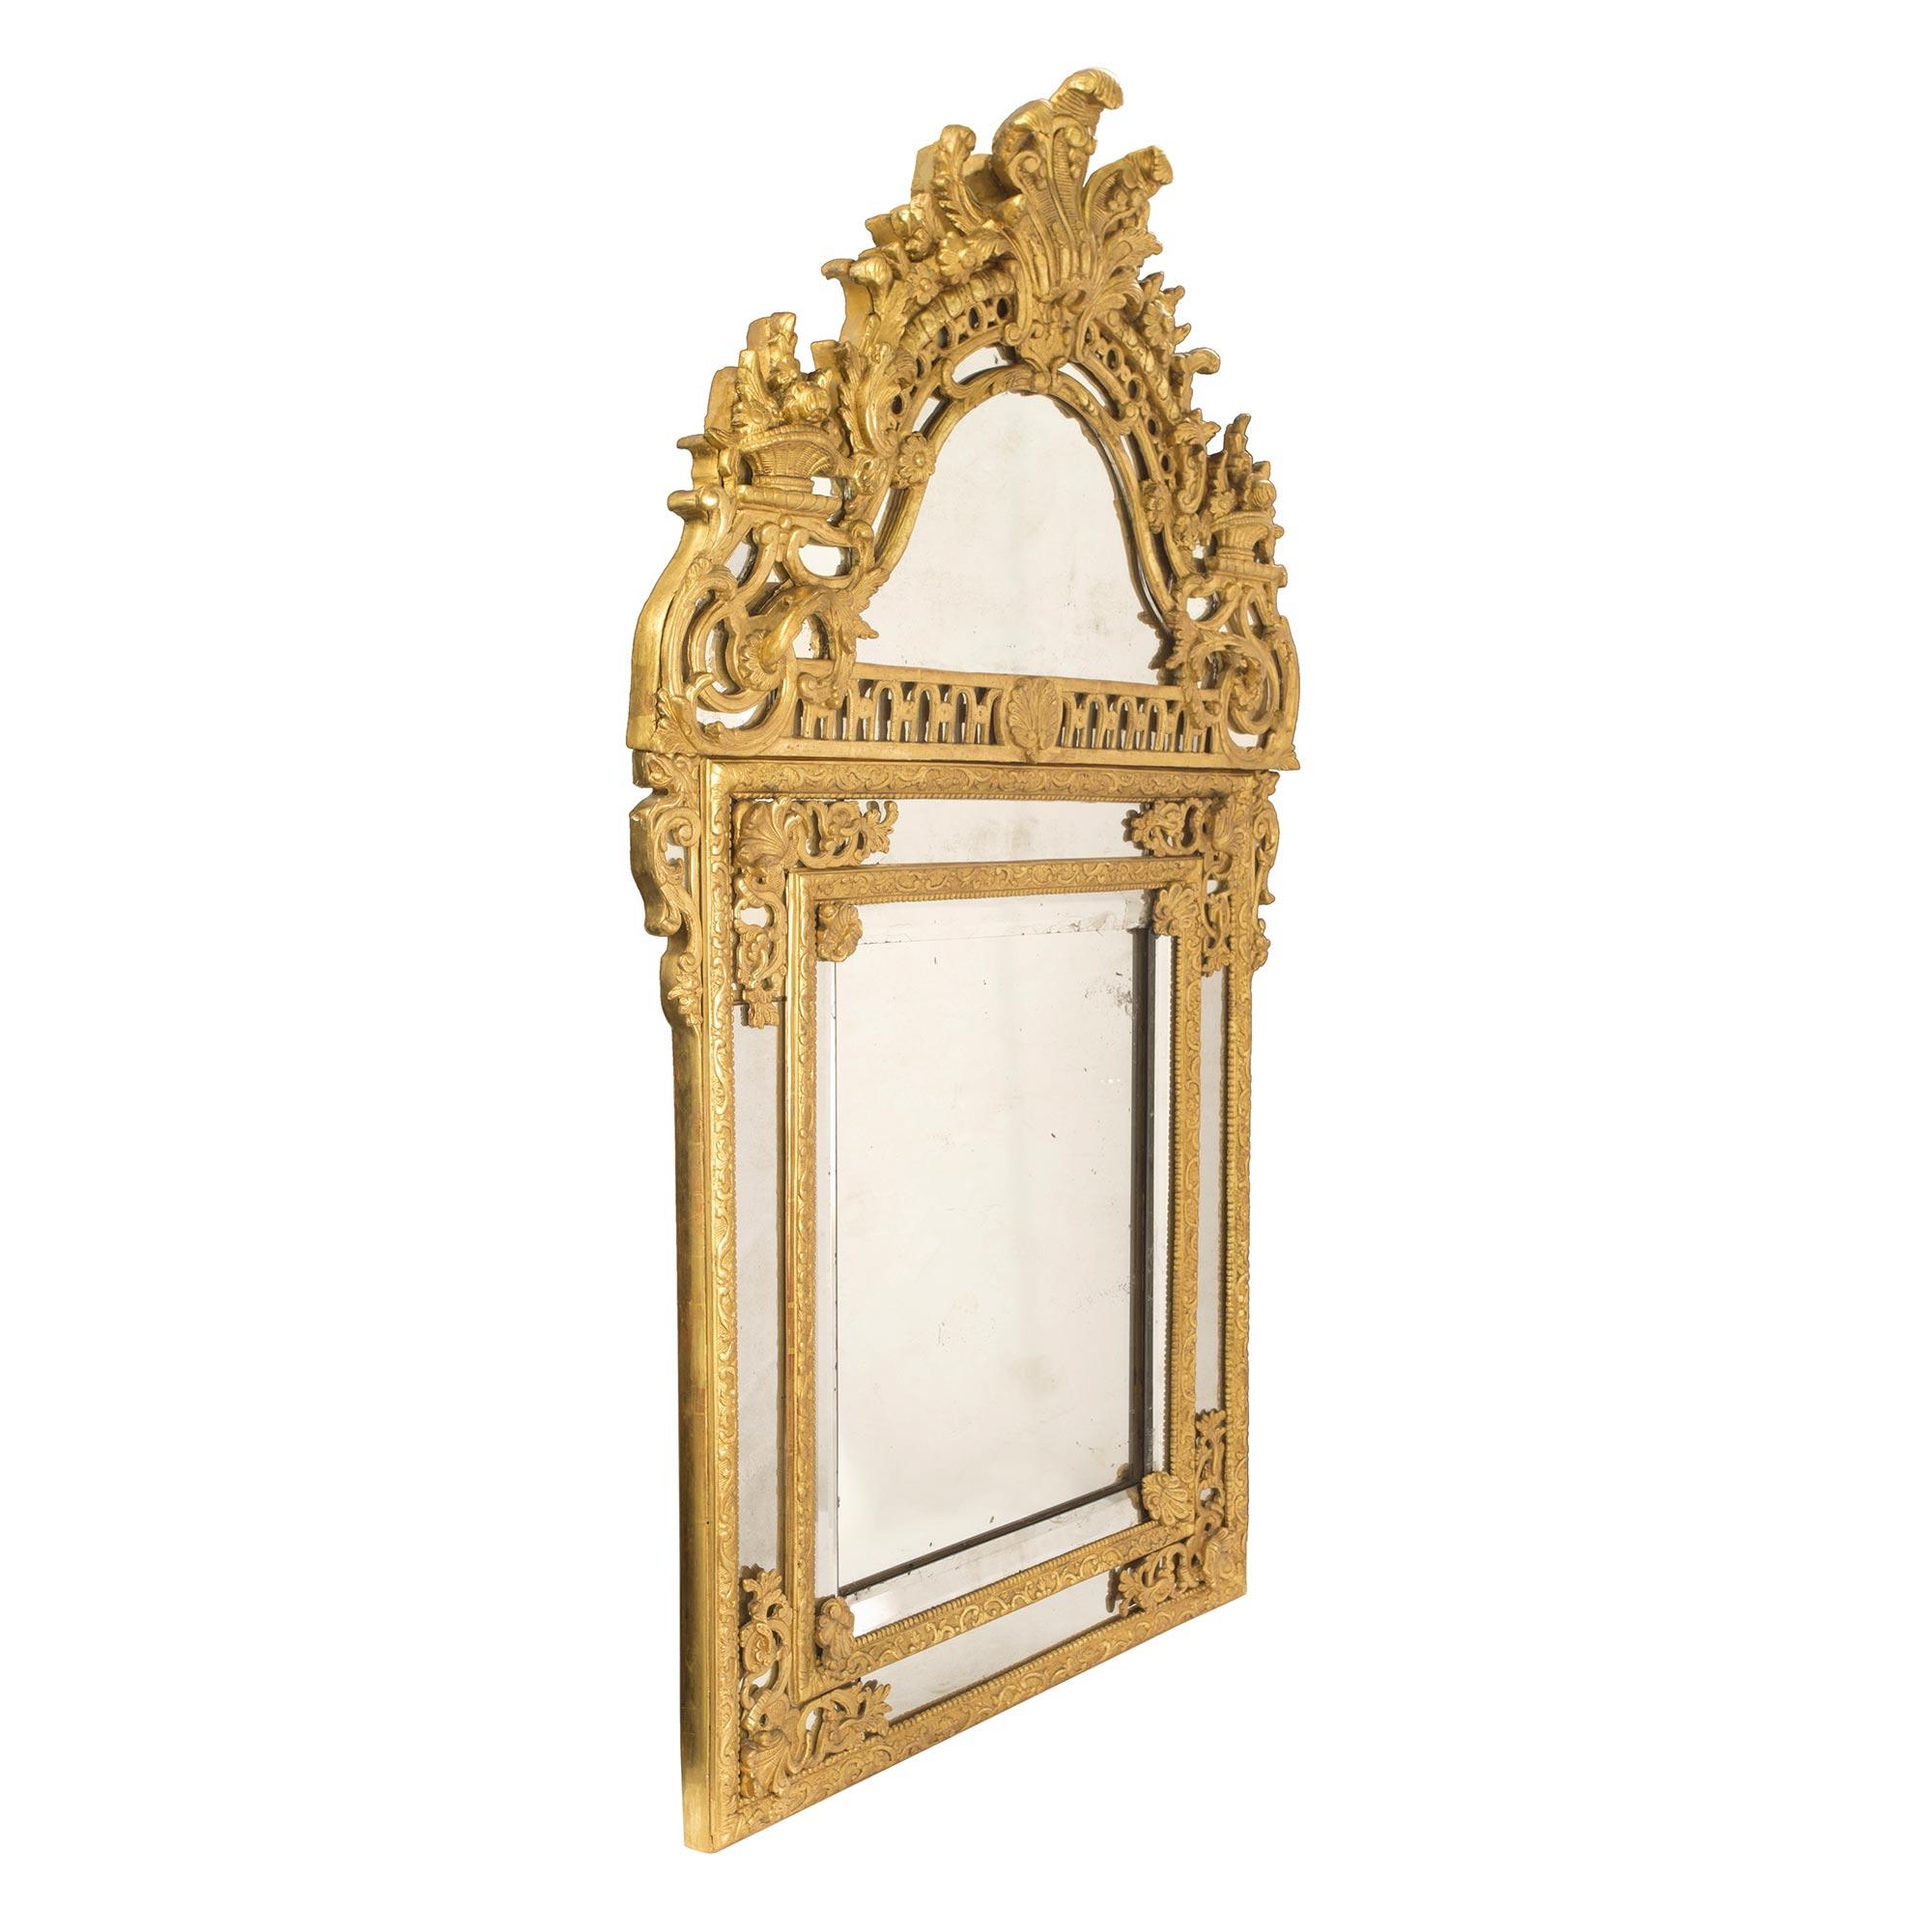 A stunning French 18th century Régence Period double framed giltwood mirror. The frame displays striking and intricately detailed foliate designs and beautiful detailed pierced foliate corner reserves. The majestic pierced top crown has a lovely